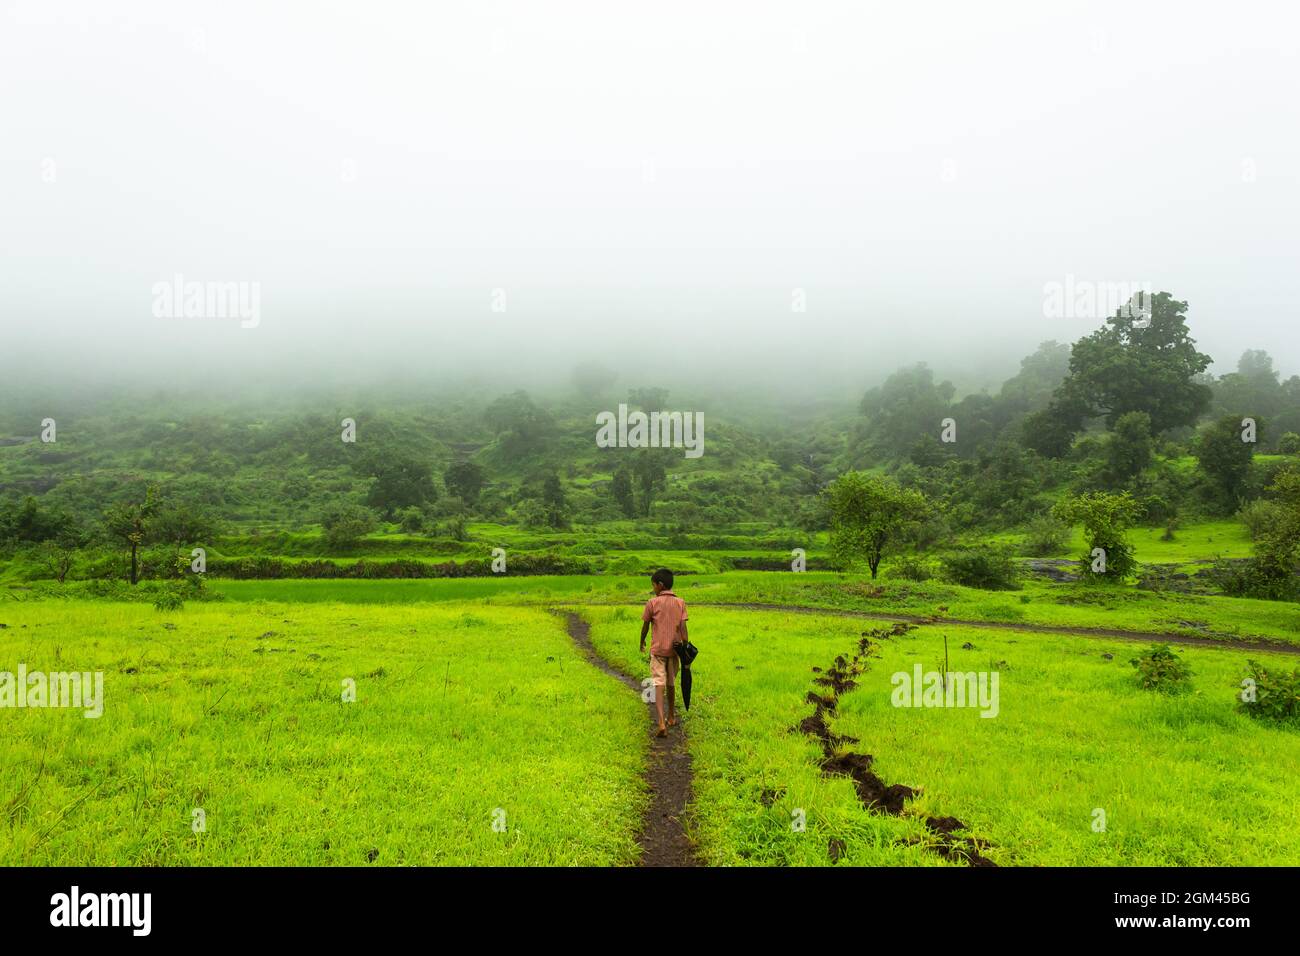 The different beautiful view of paddy field in india during rainey season and foggy weather. Stock Photo